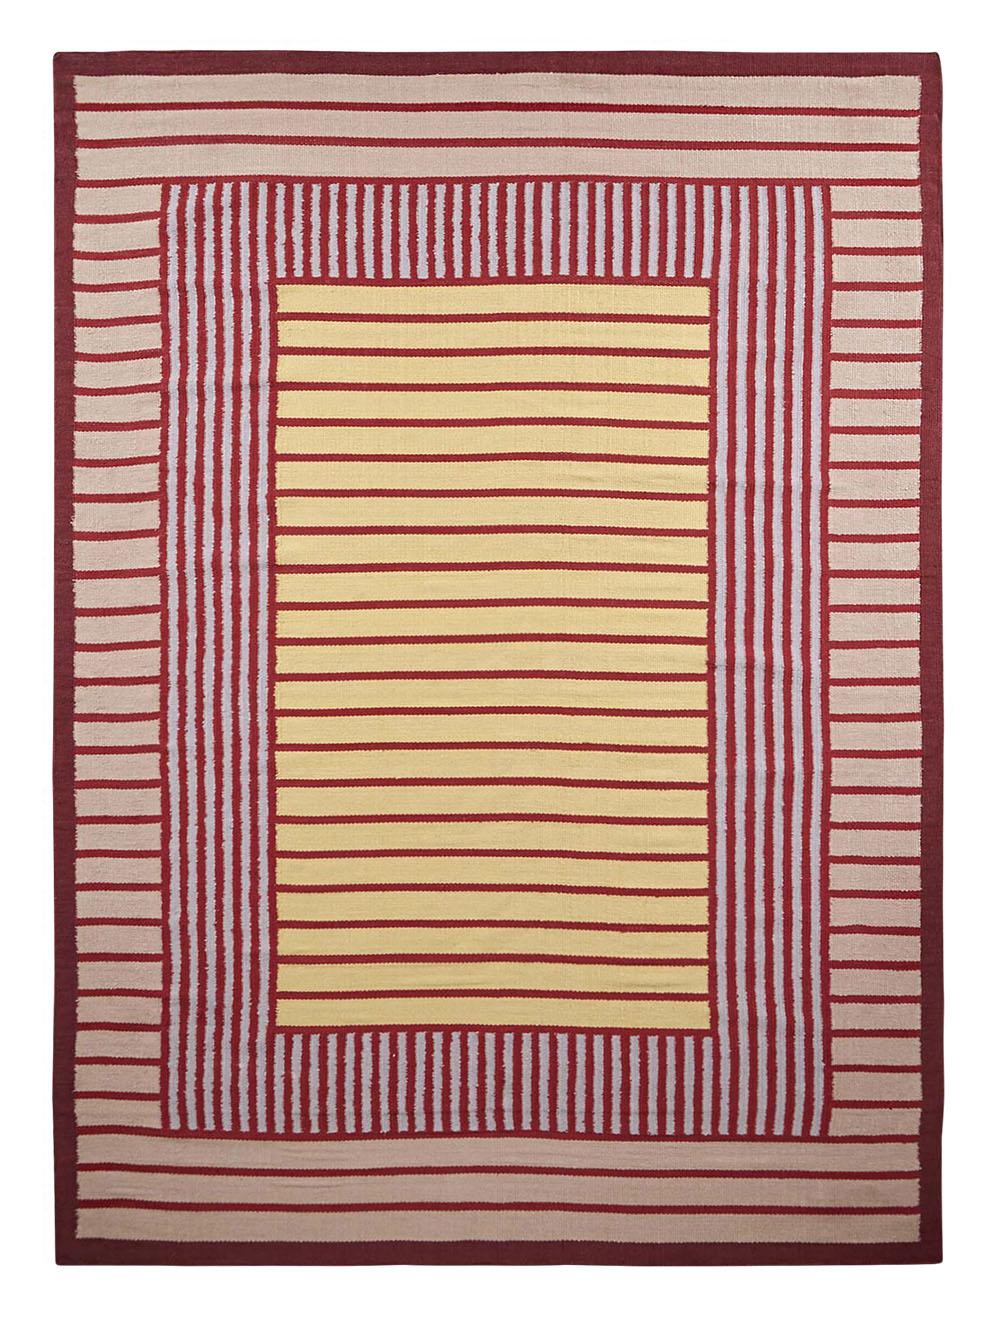 Red yellow Hemp carpet by Massimo Copenhagen
Designed by Tanja Kirst
Handwoven
Materials: 100% Hemp yarn.
Dimensions: W 250 x H 350 cm.
Available colors: Multi, Red/Yellow, Nougat Rose, and Grey
Other dimensions are available: 200x300